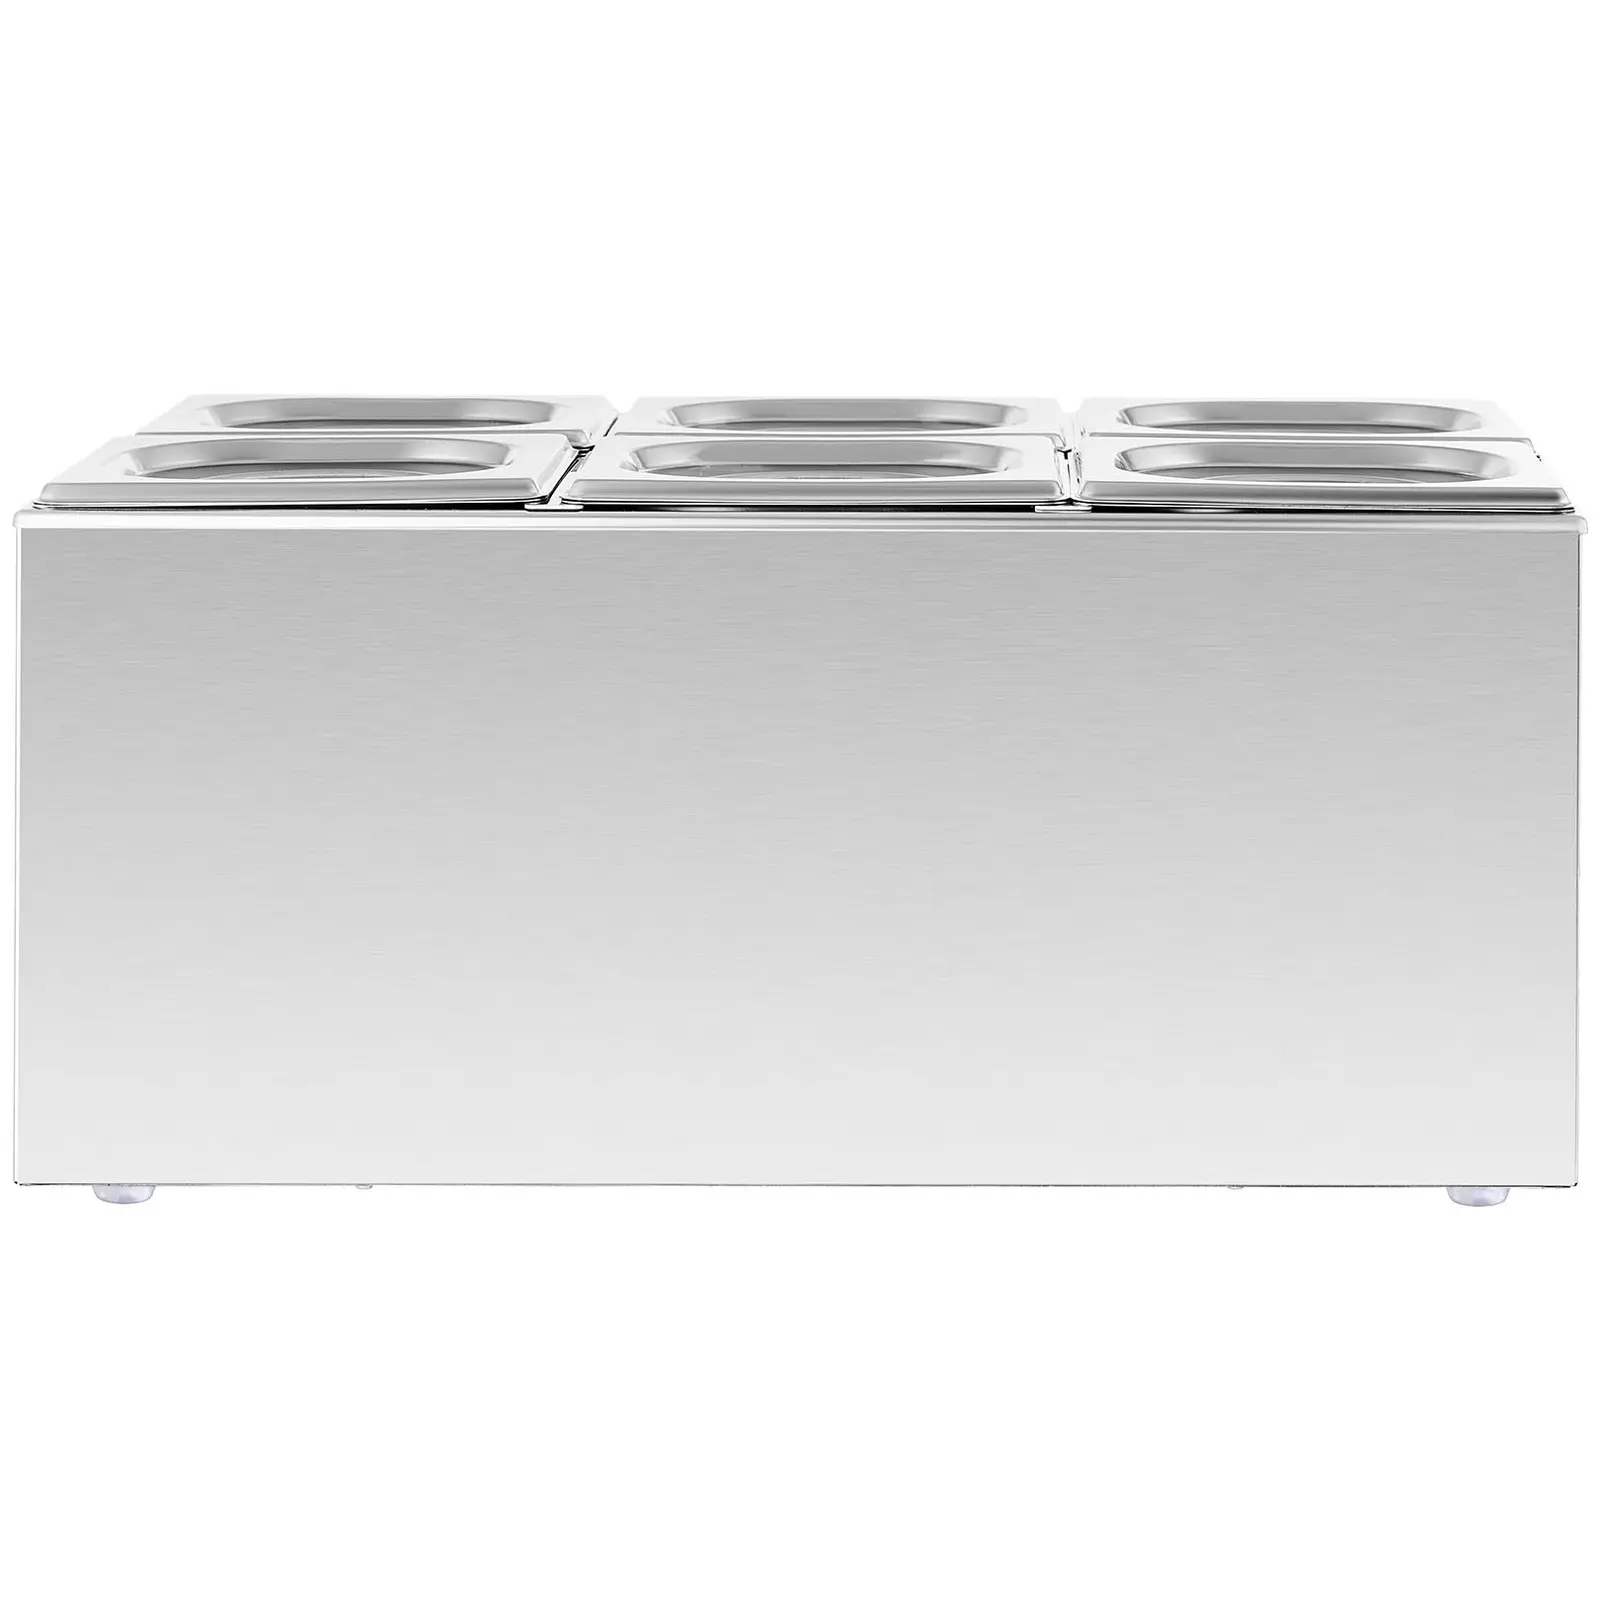 Bemar - 640 W - 6 x GN GN 1/6 - Royal Catering